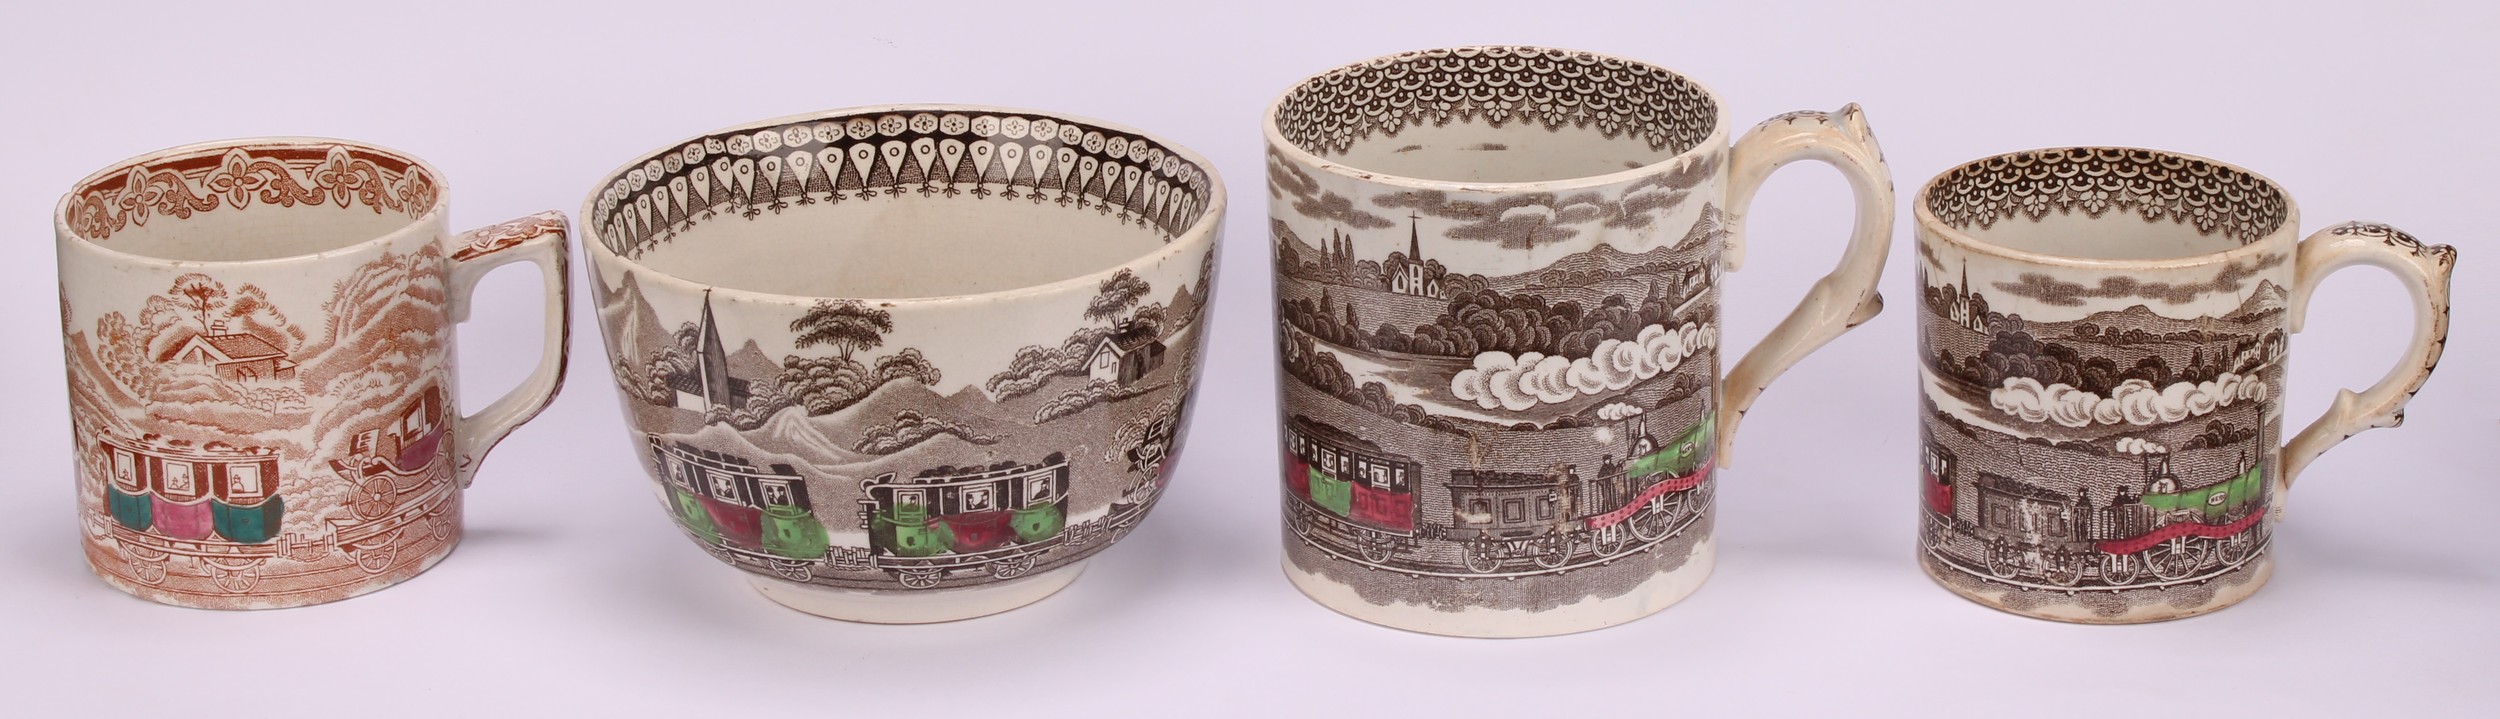 Railway Interest - steam locomotives, a 19th century Staffordshire pearlware mug, printed in sepia - Image 2 of 10